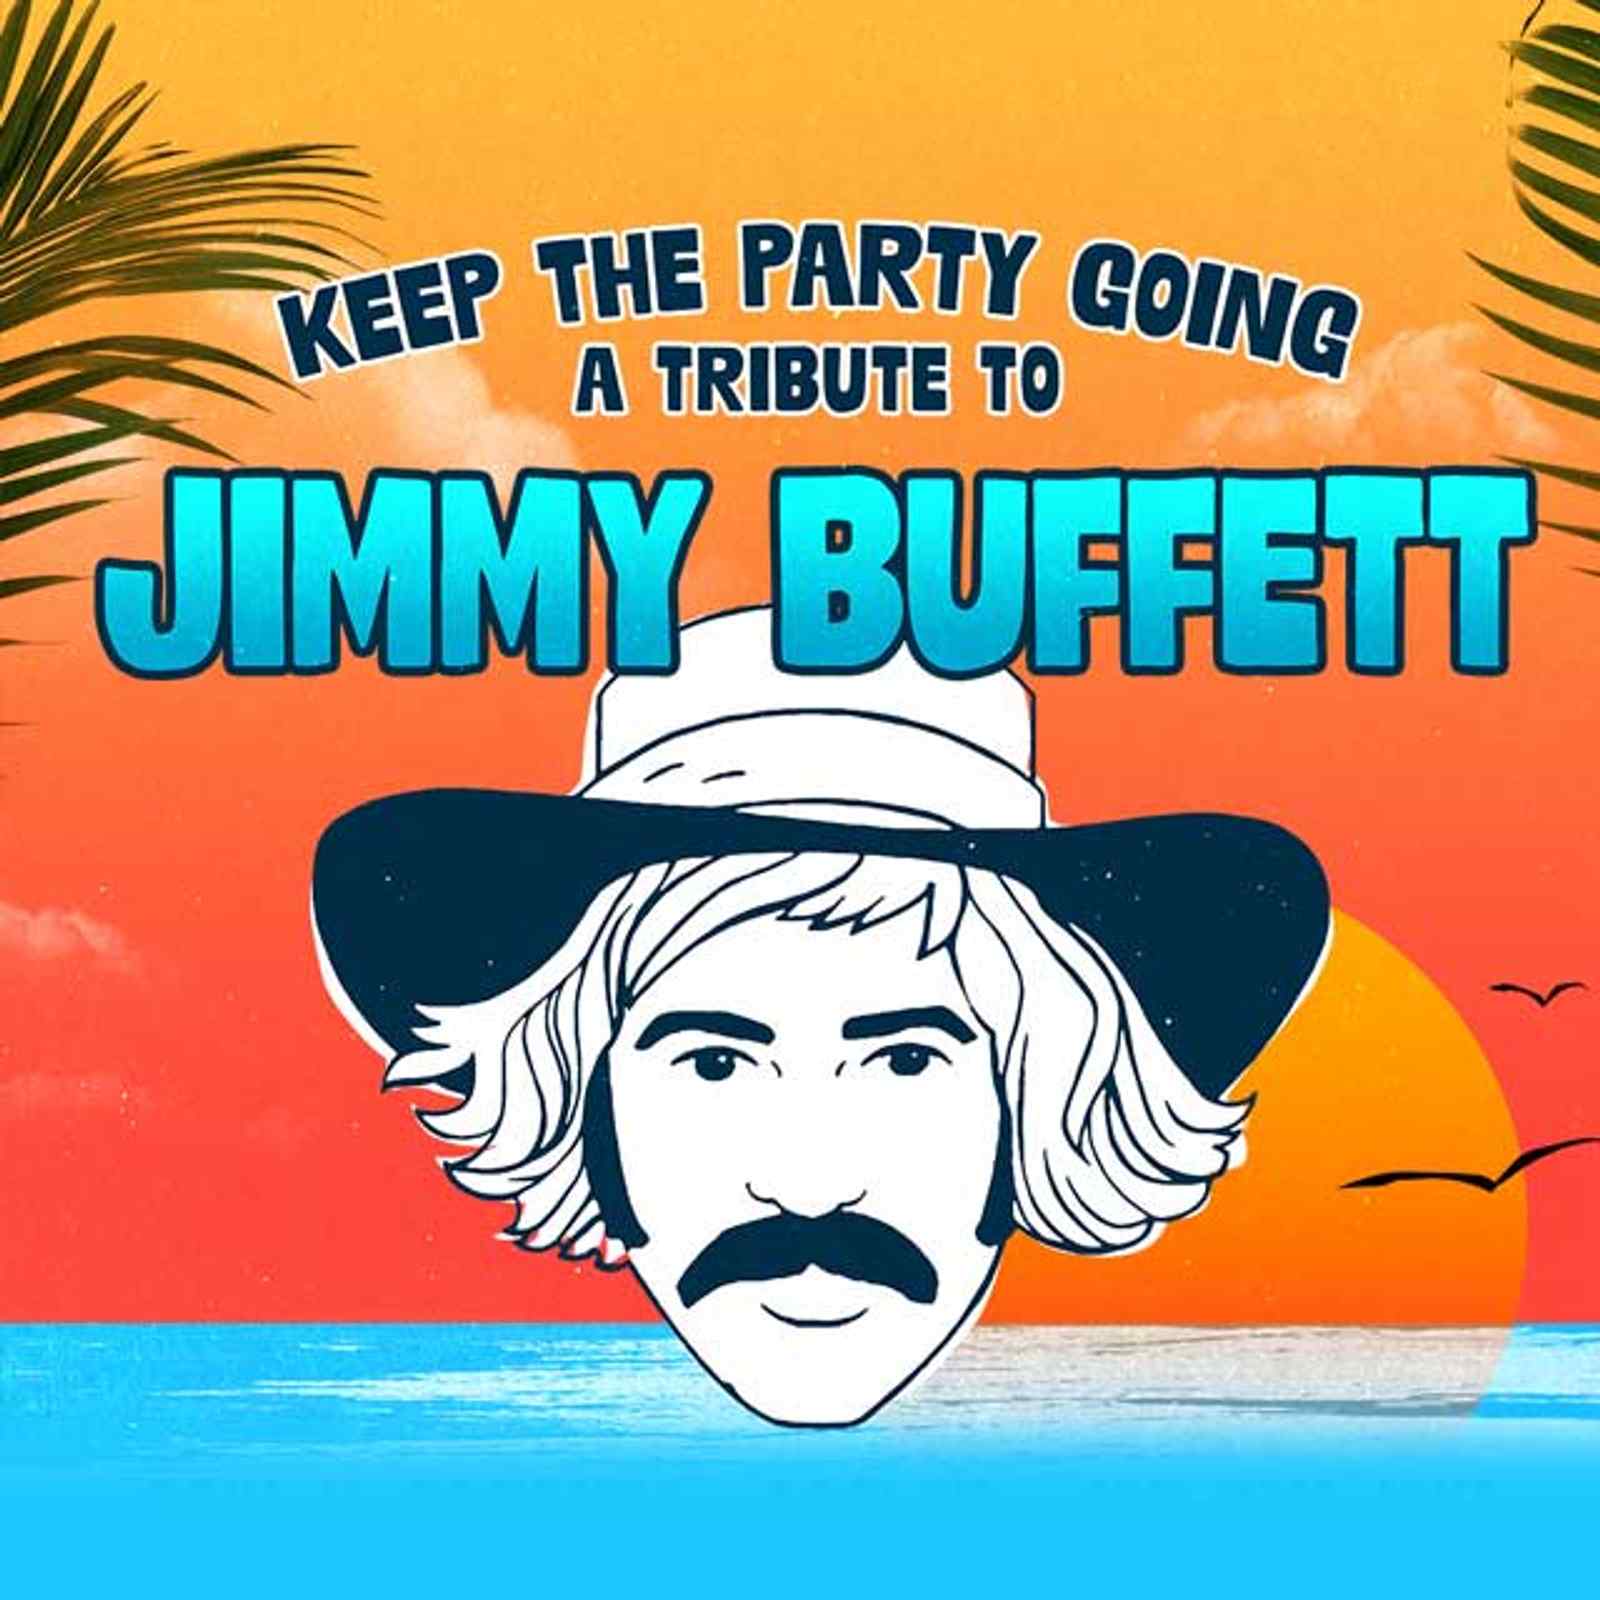 Keep The Party Going: A Tribute To Jimmy Buffett - Thursday April 11th